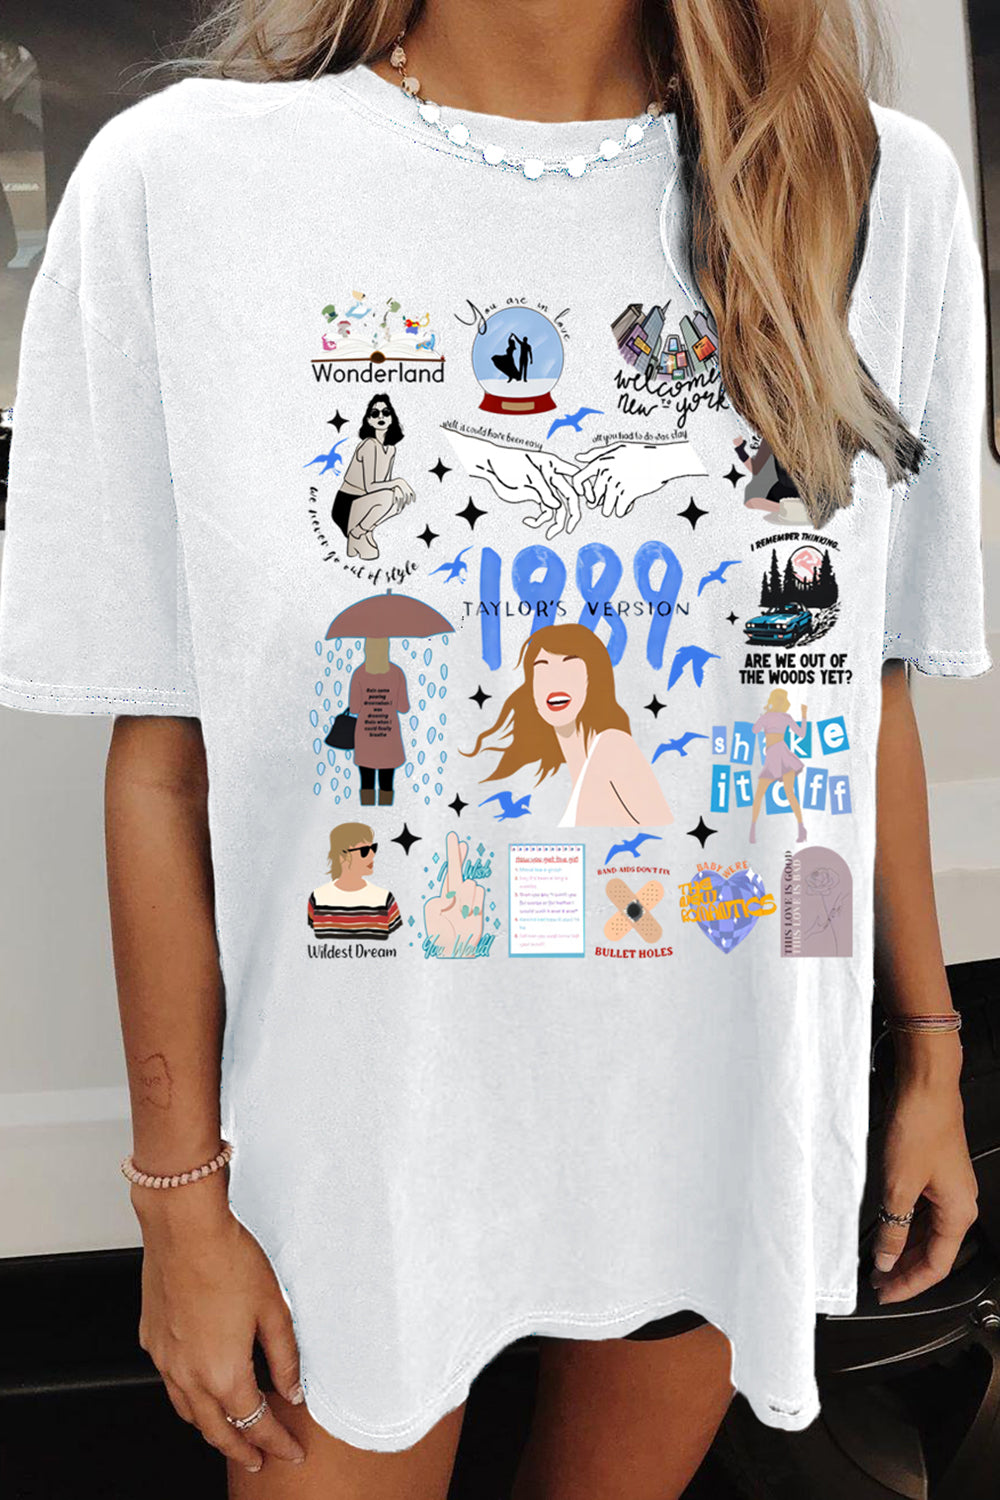 1989 Taylor's Version Tee For Women